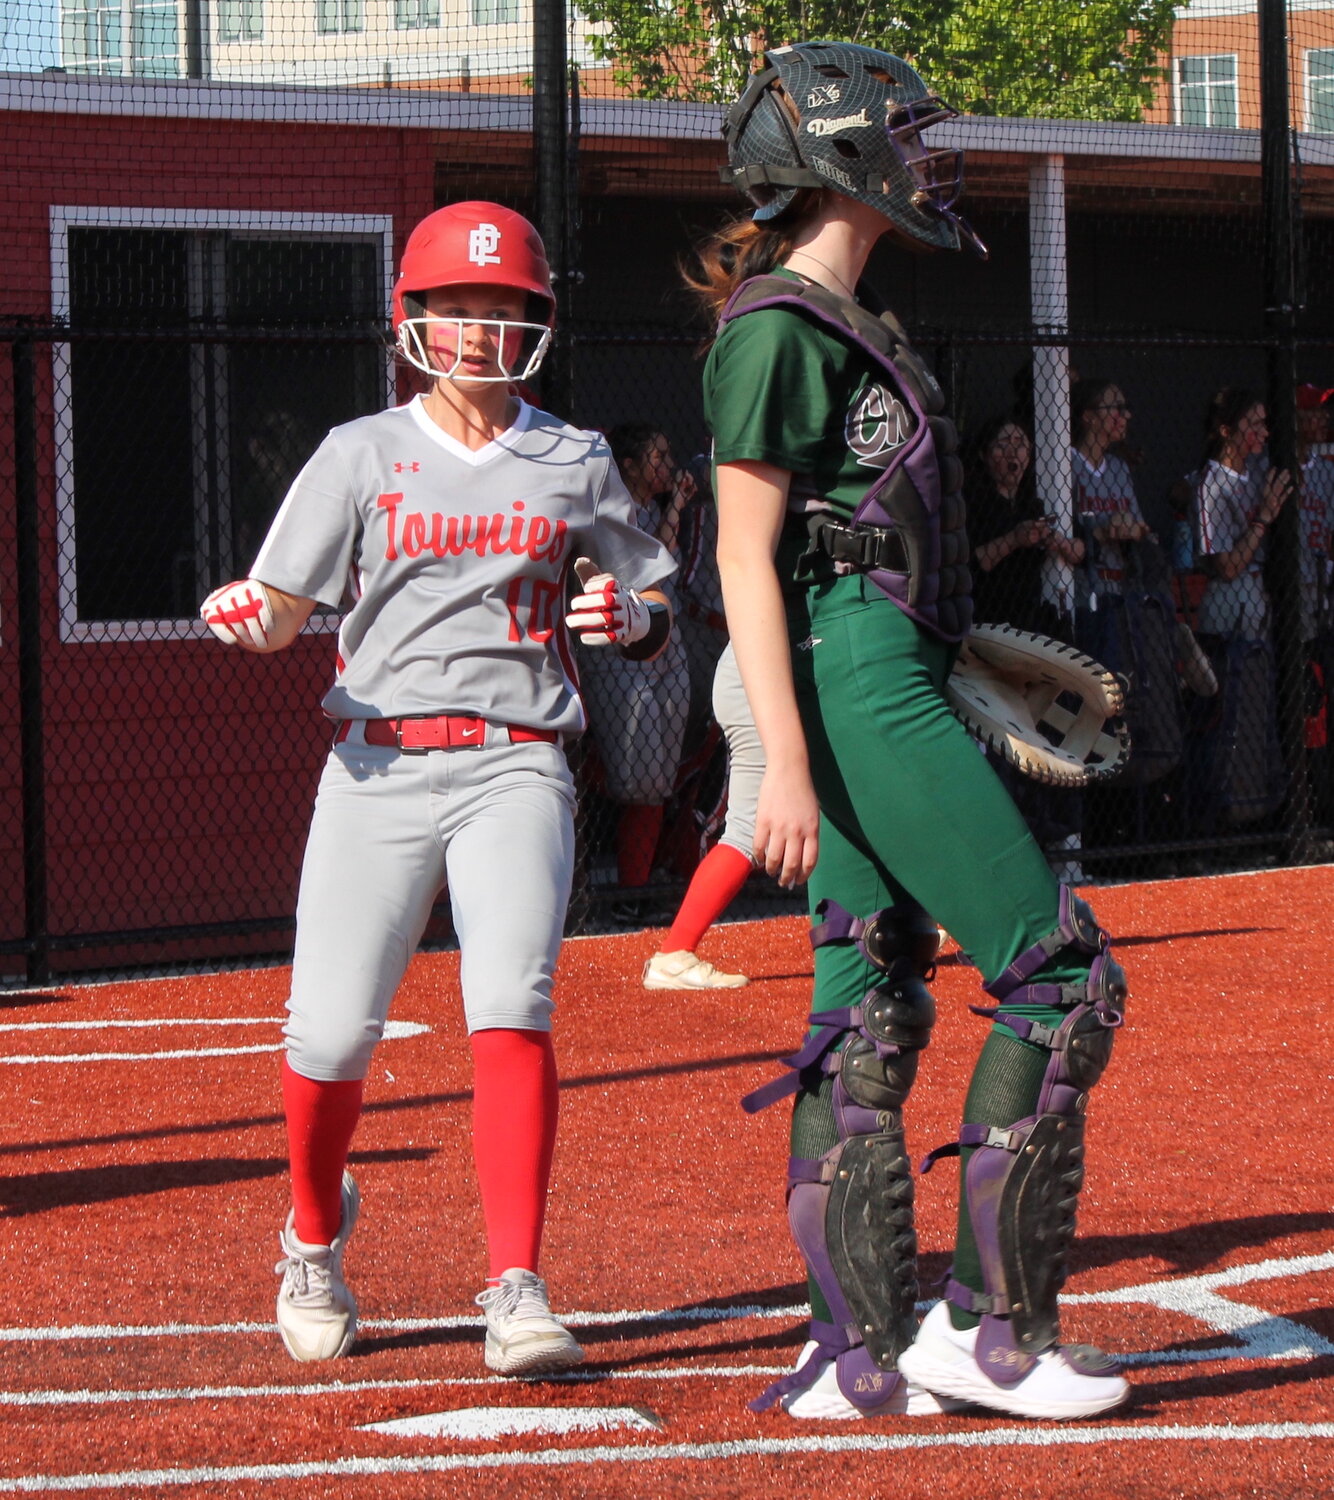 The Townies' Trinity Provencher comes in with the first EPHS run on Emma Bergeron's triple.